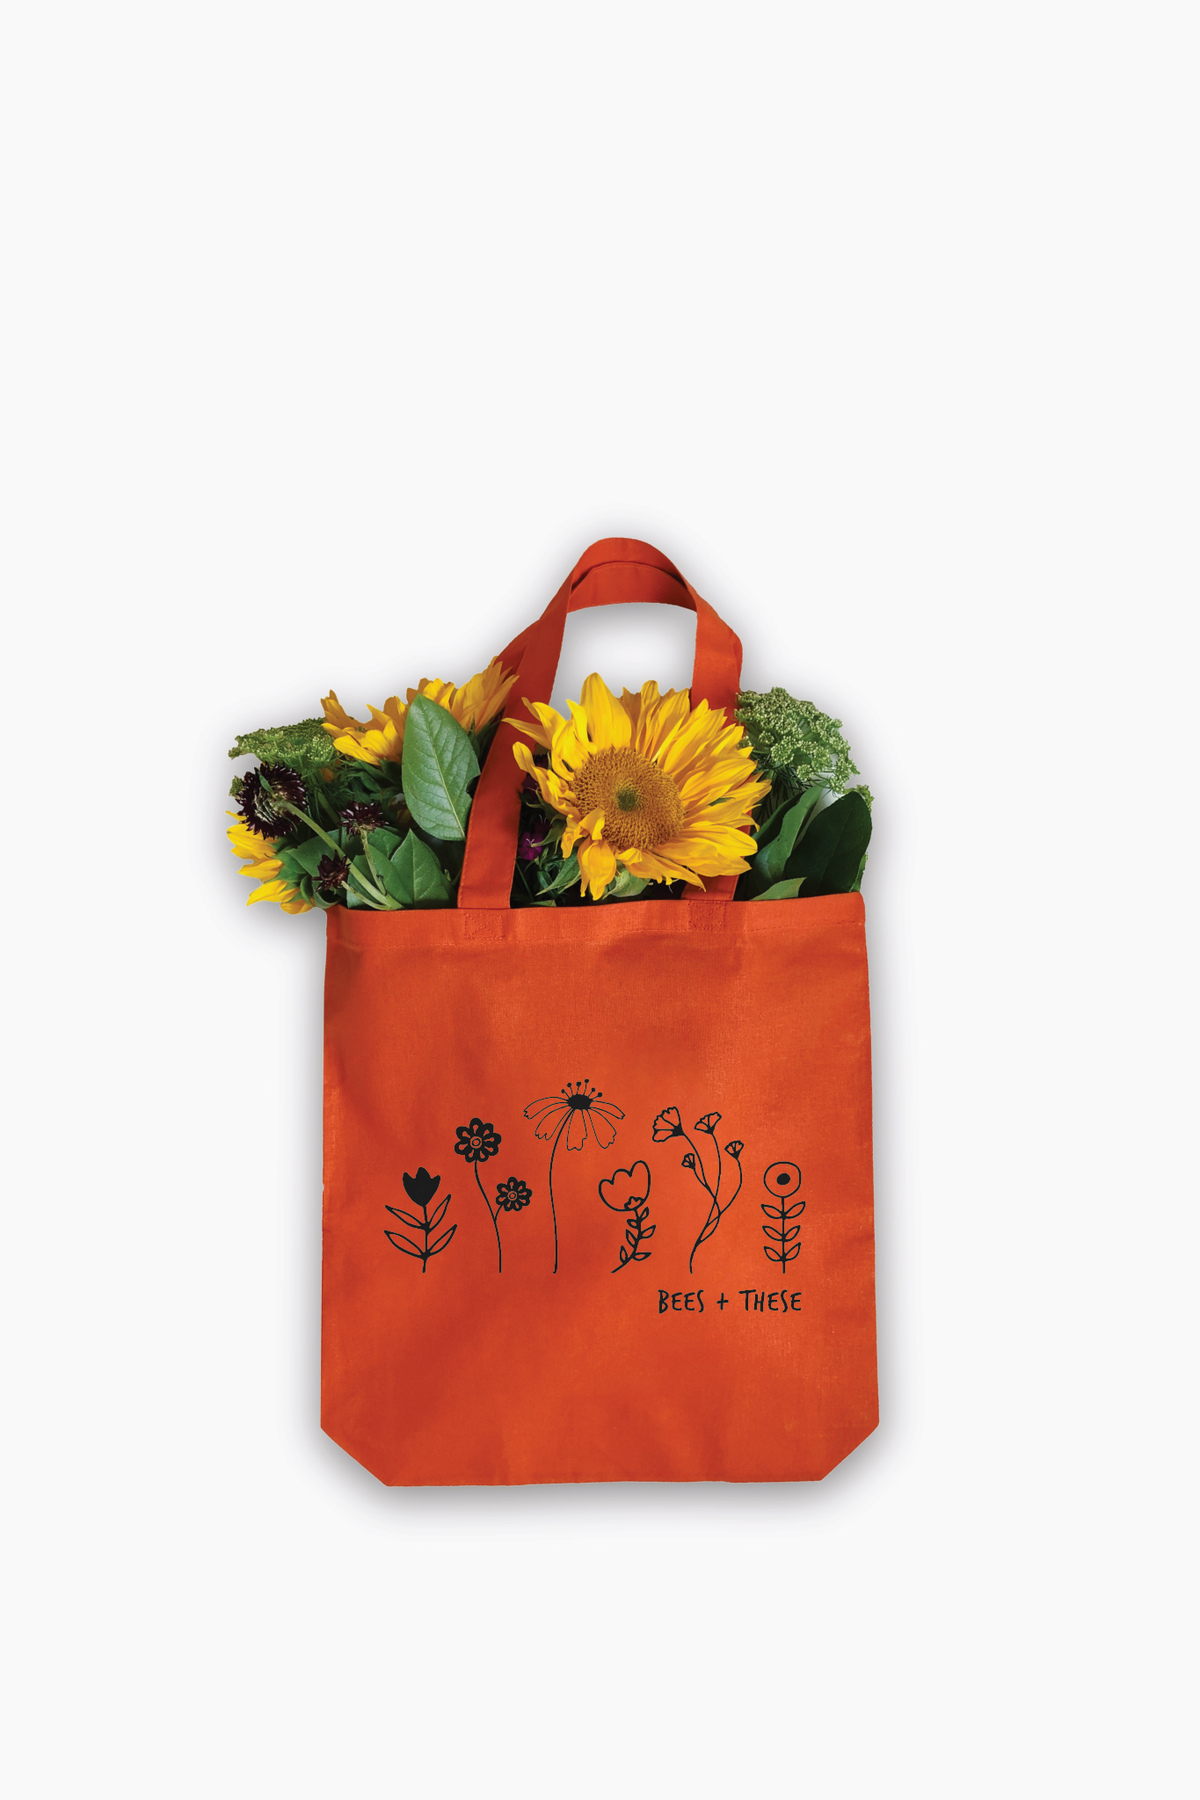 Bees + These Tote Bag